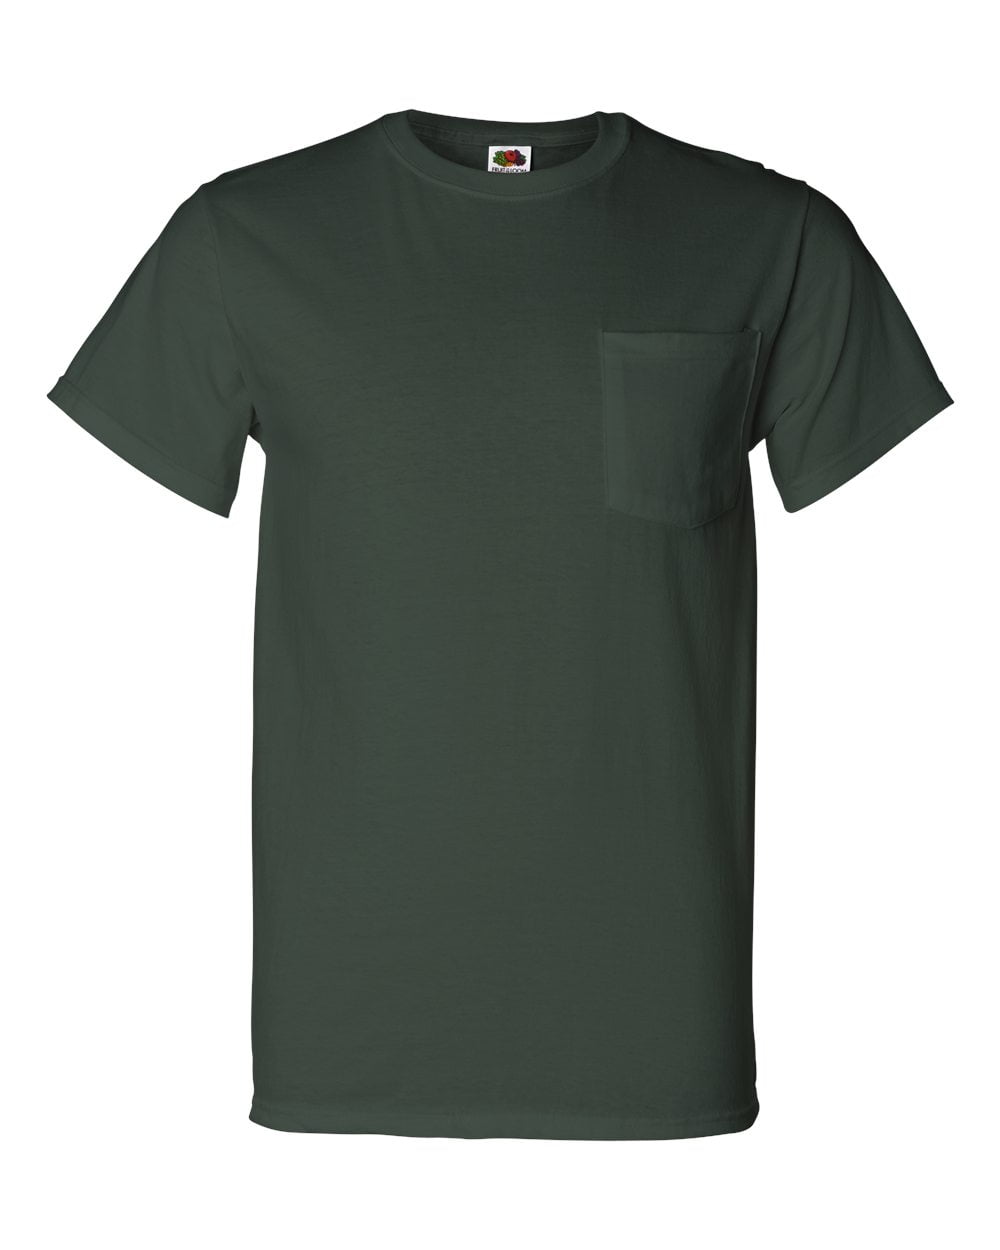 FOREST GREEN Fruit of the Loom 100% Heavy Cotton HD Pocket T-Shirt